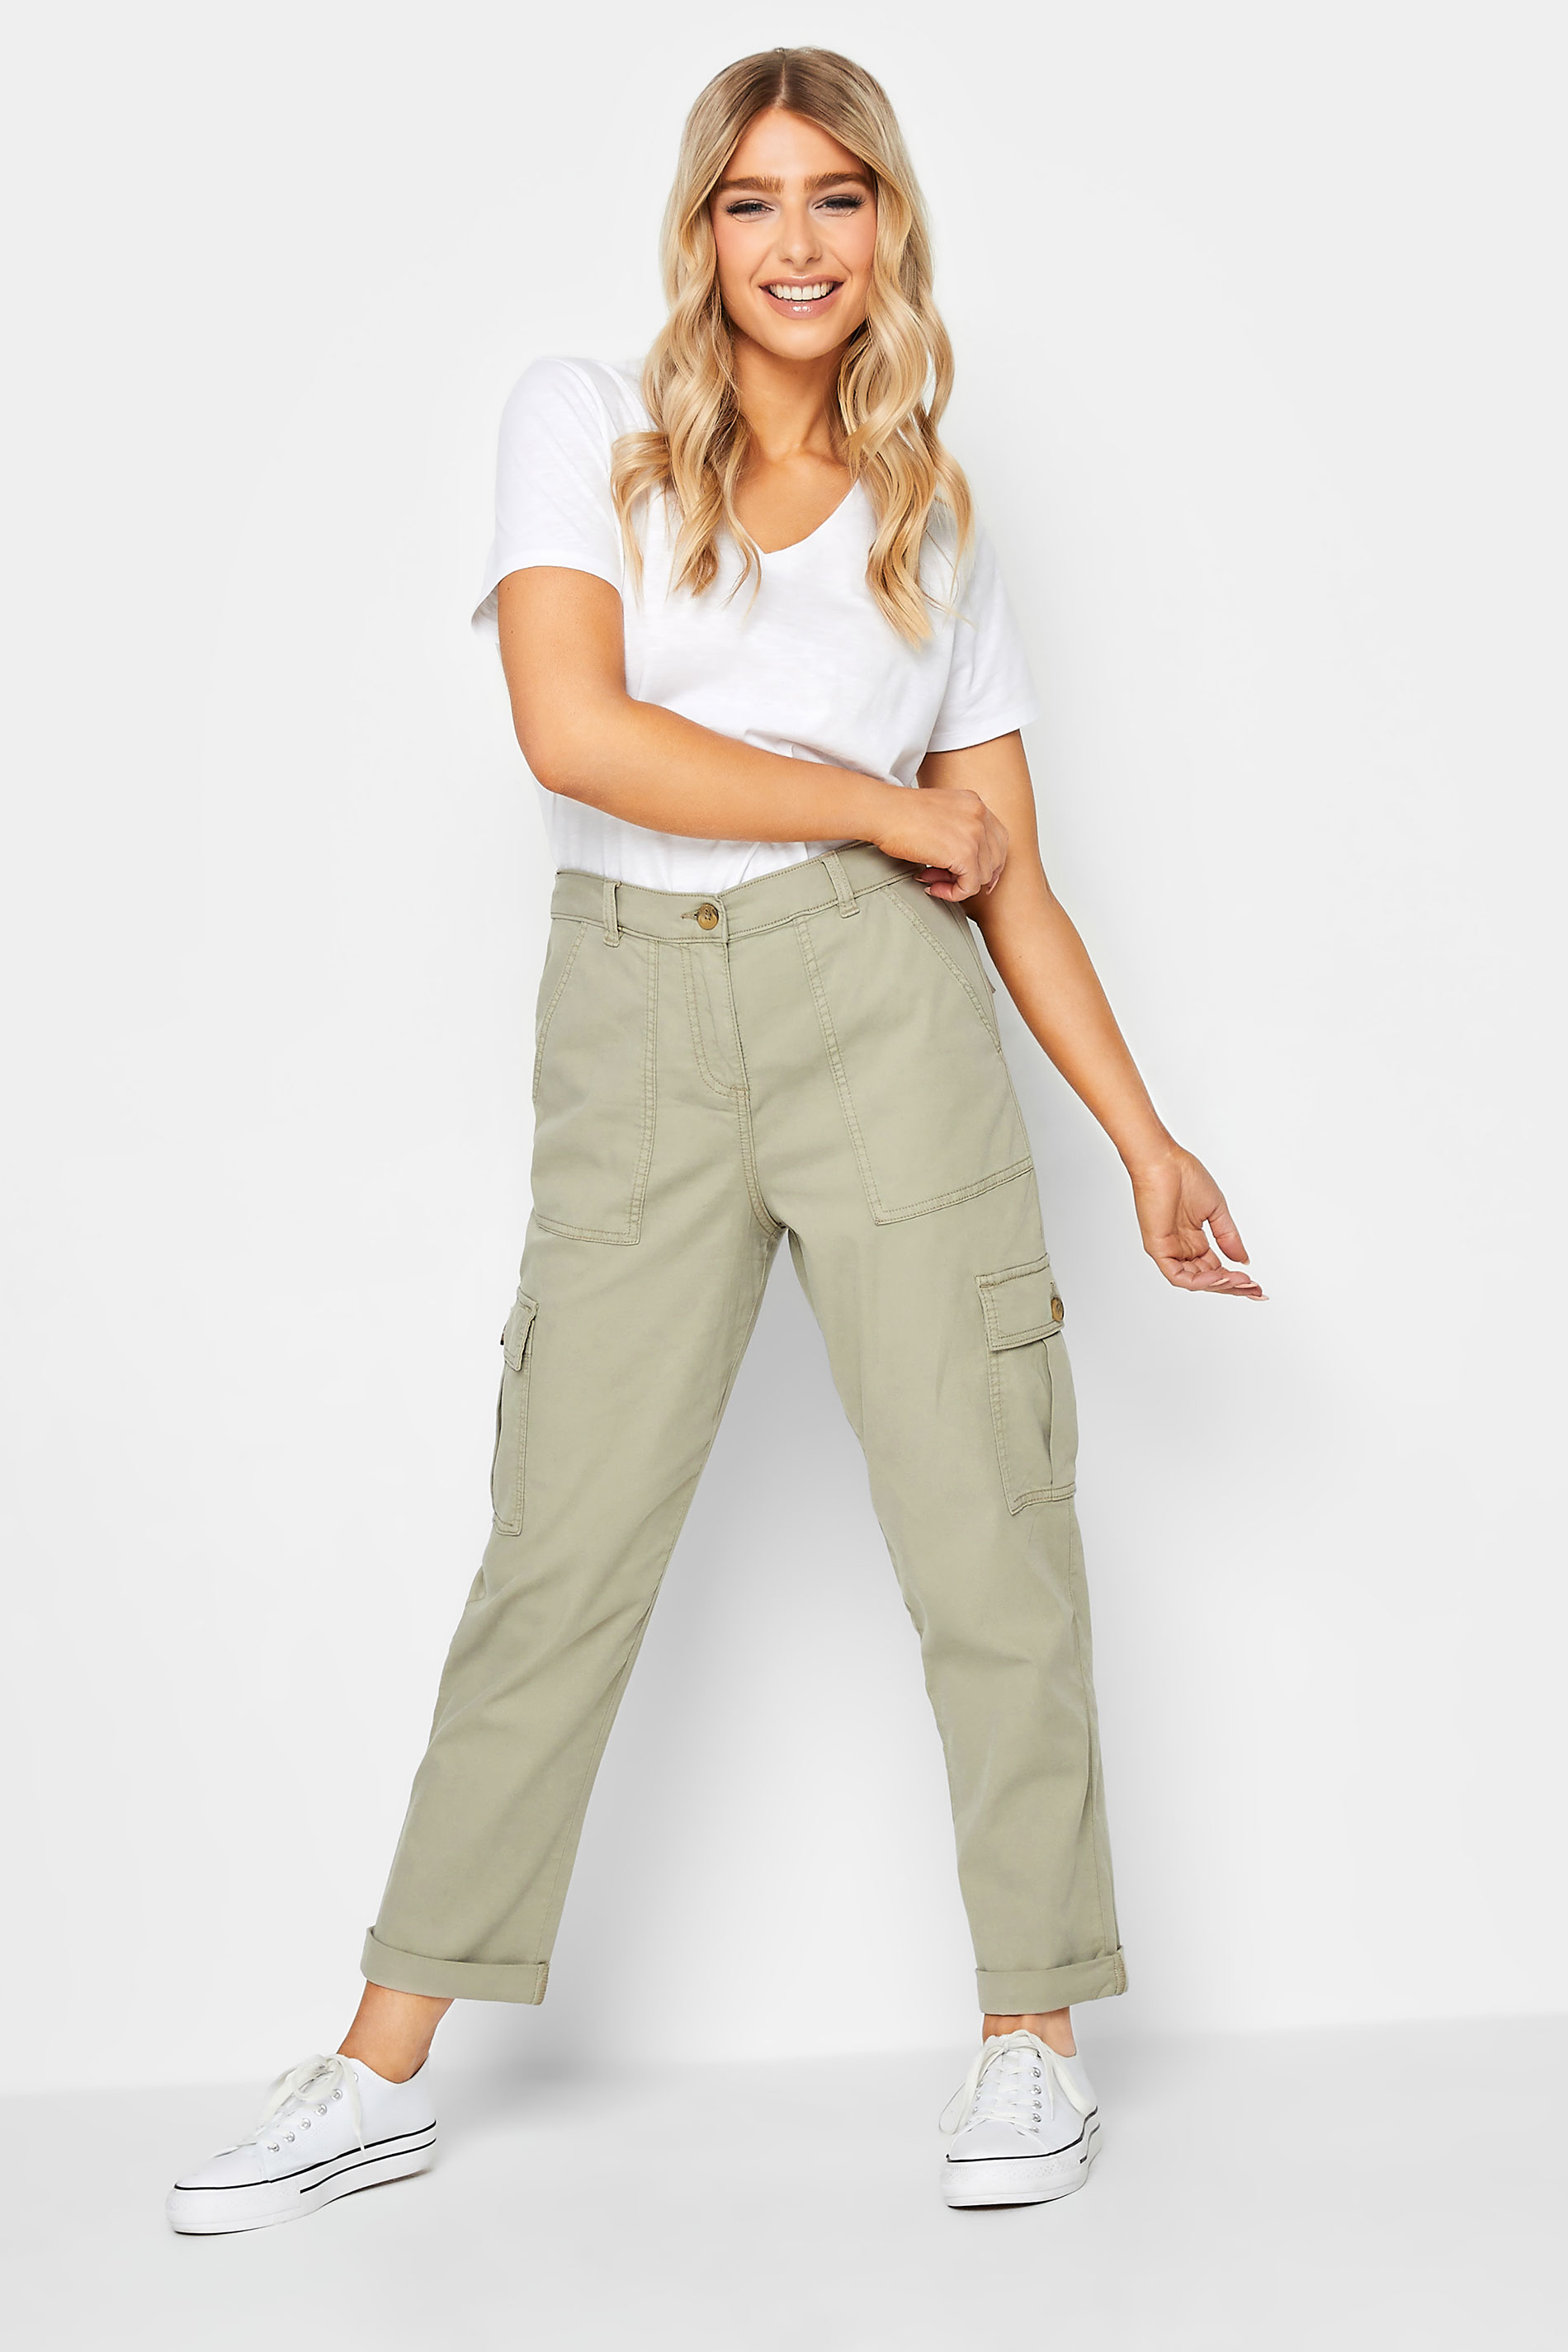 Pockets For Women - Limited Collection Curve Green Smudged Camo Print Cargo  Trousers, Women's Curve & Plus Size, Limited Collection